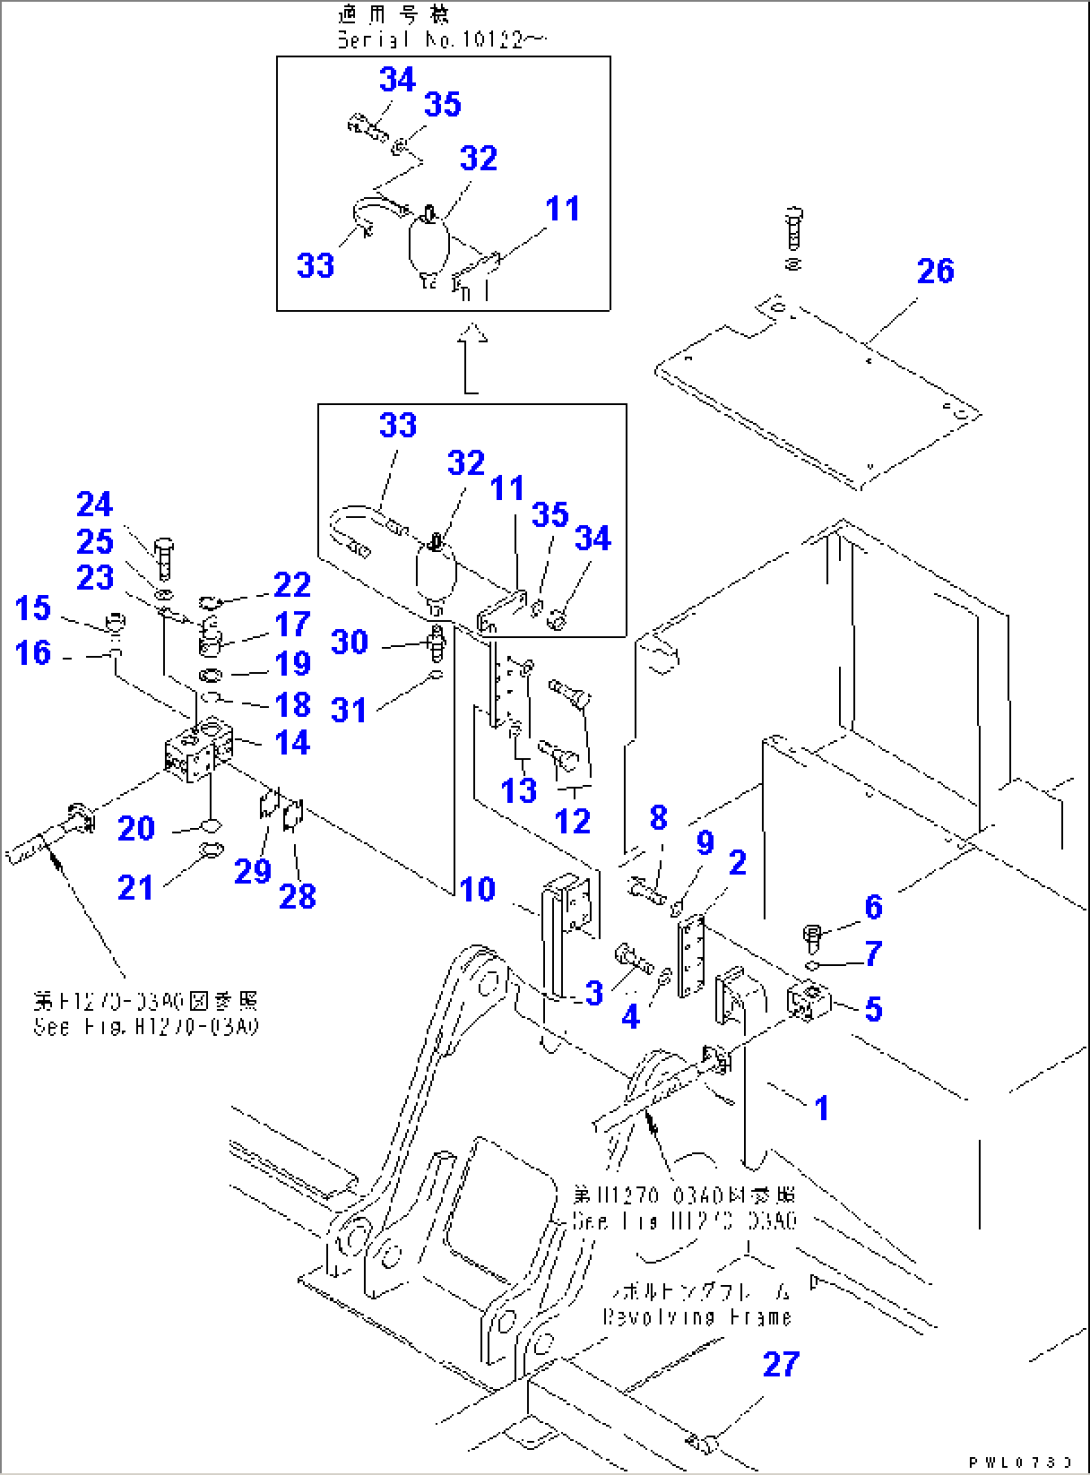 ADDITIONAL PIPING (CHAMGE ROTOR MOUNTING)(#10116-)